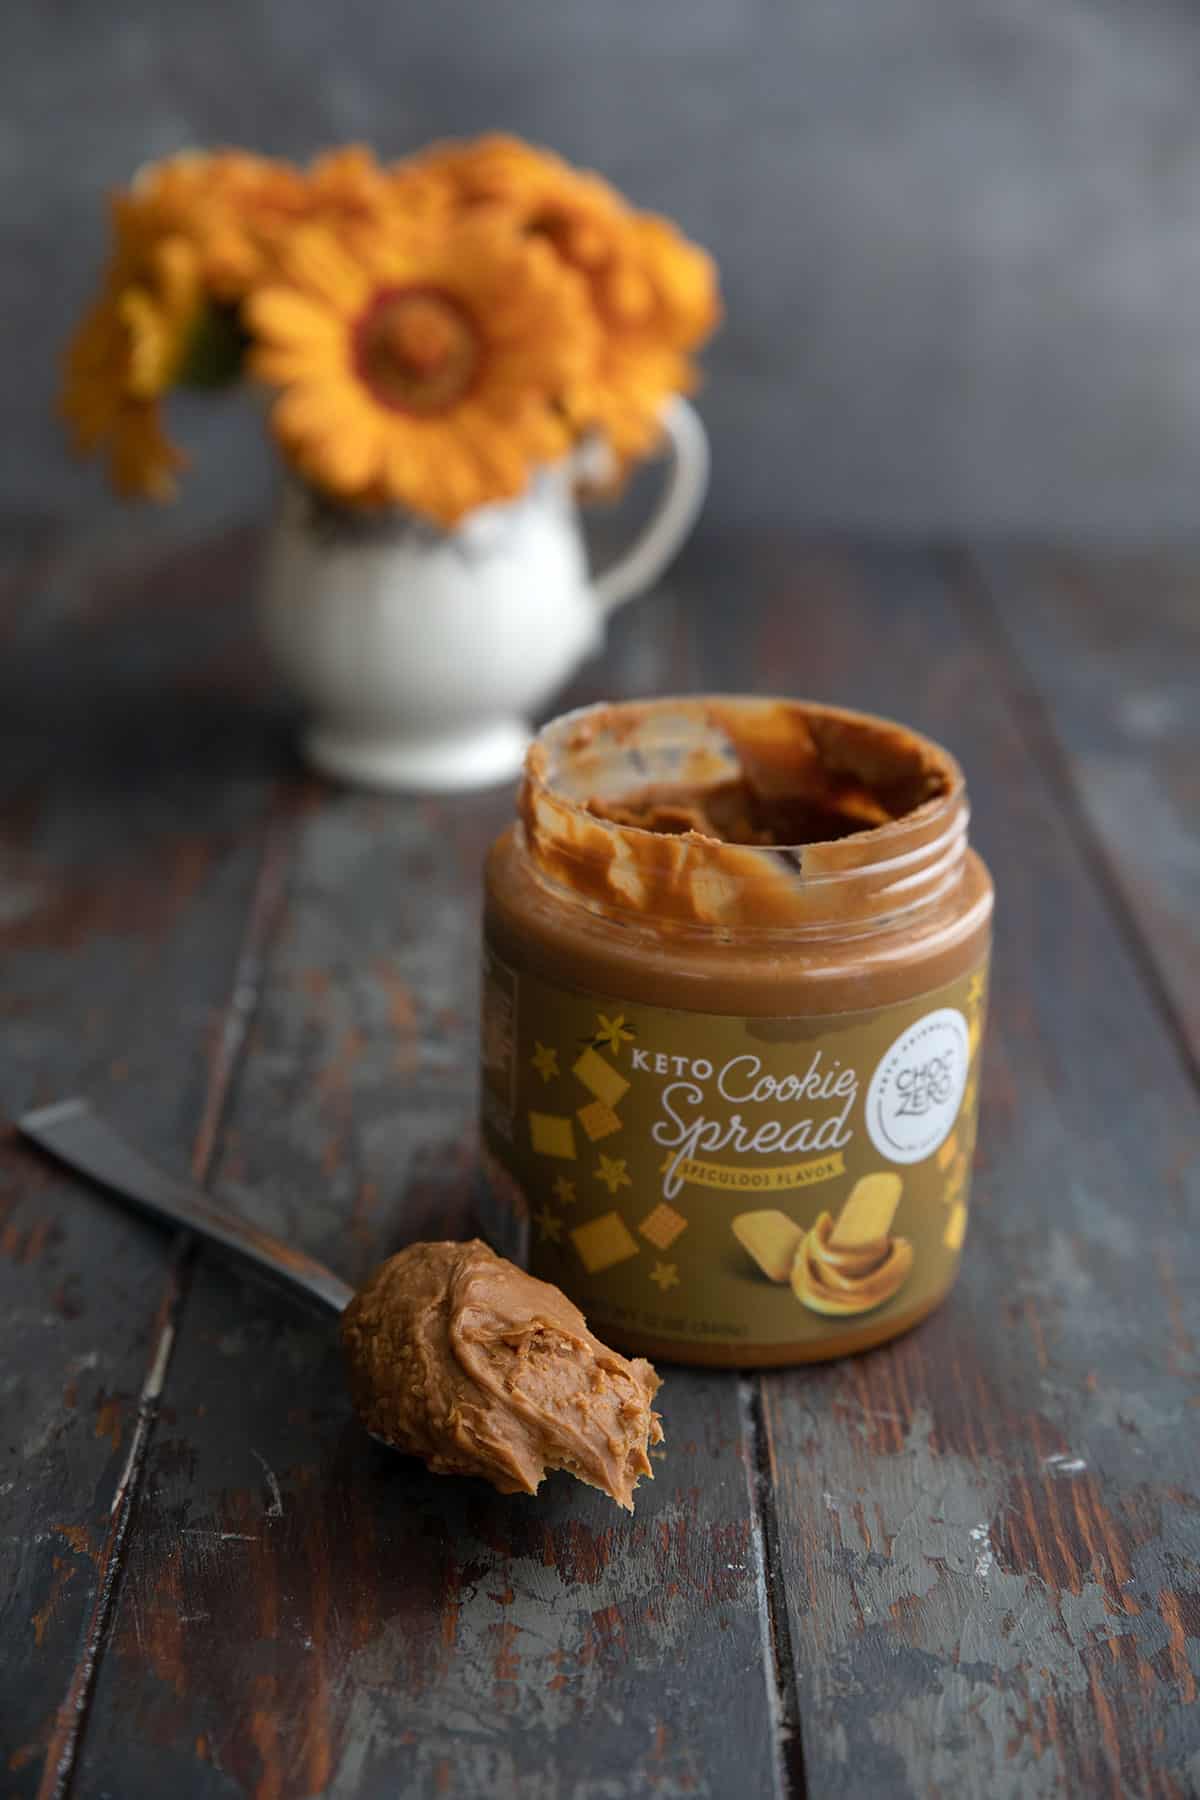 Keto cookie butter spread on a weathered wooden table with a vase of flowers in the background.